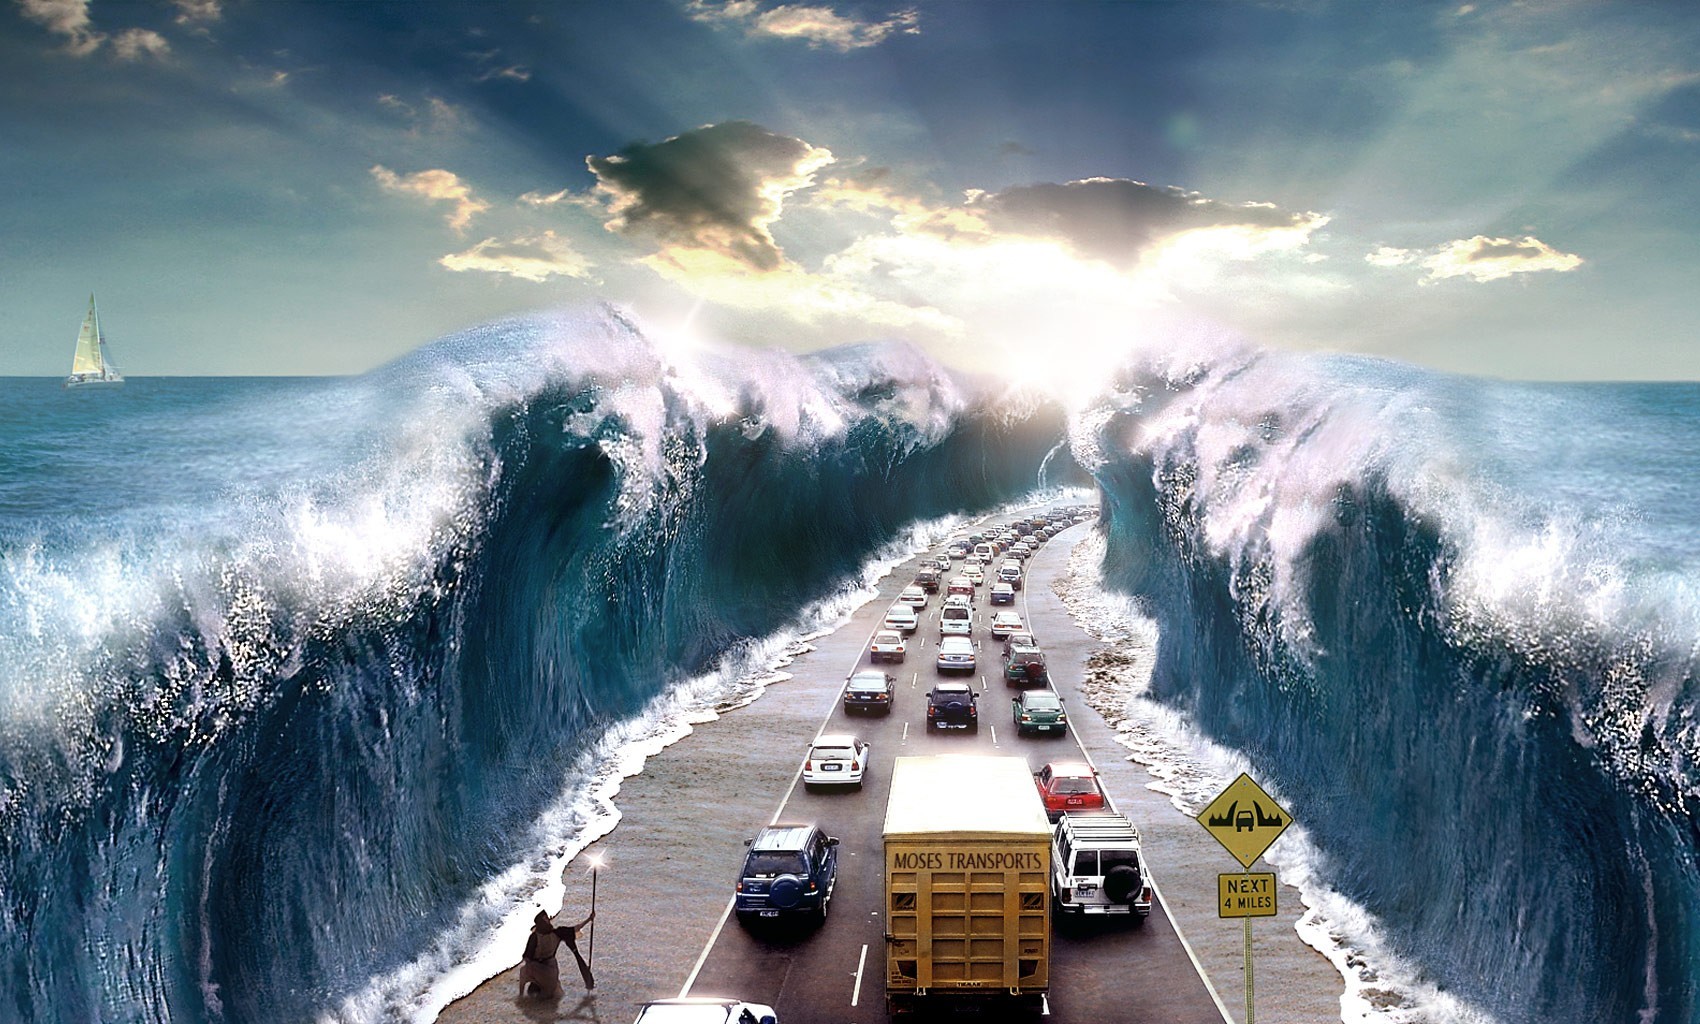  Wallpapers on Cars Humor Funny Bible Flood Moses Hd Wallpaper   Funny   Humour